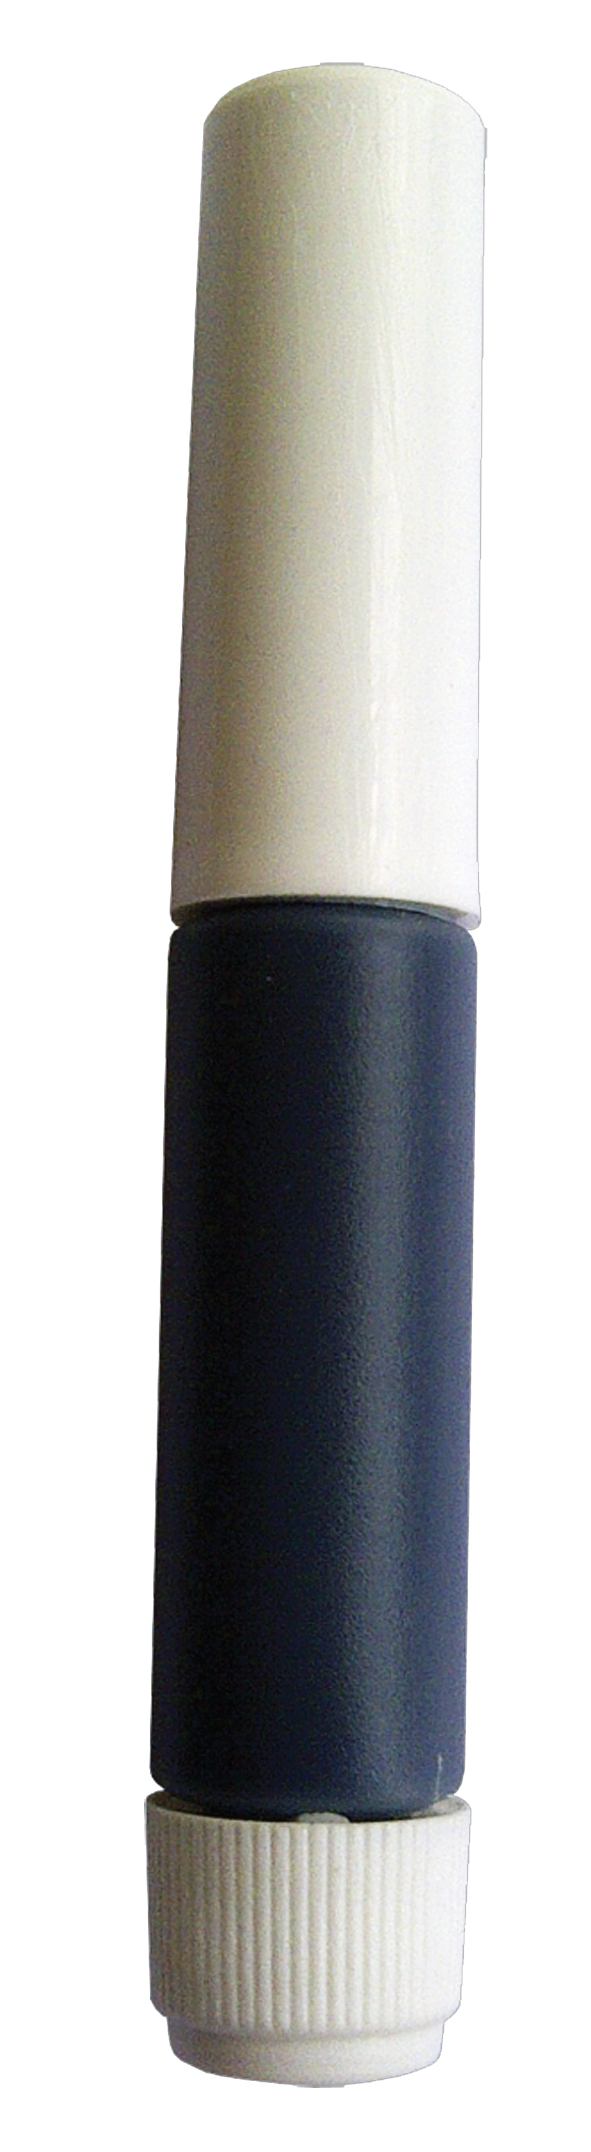 Green Re-fill Ink for Self Inking Stamp. 1.5ml